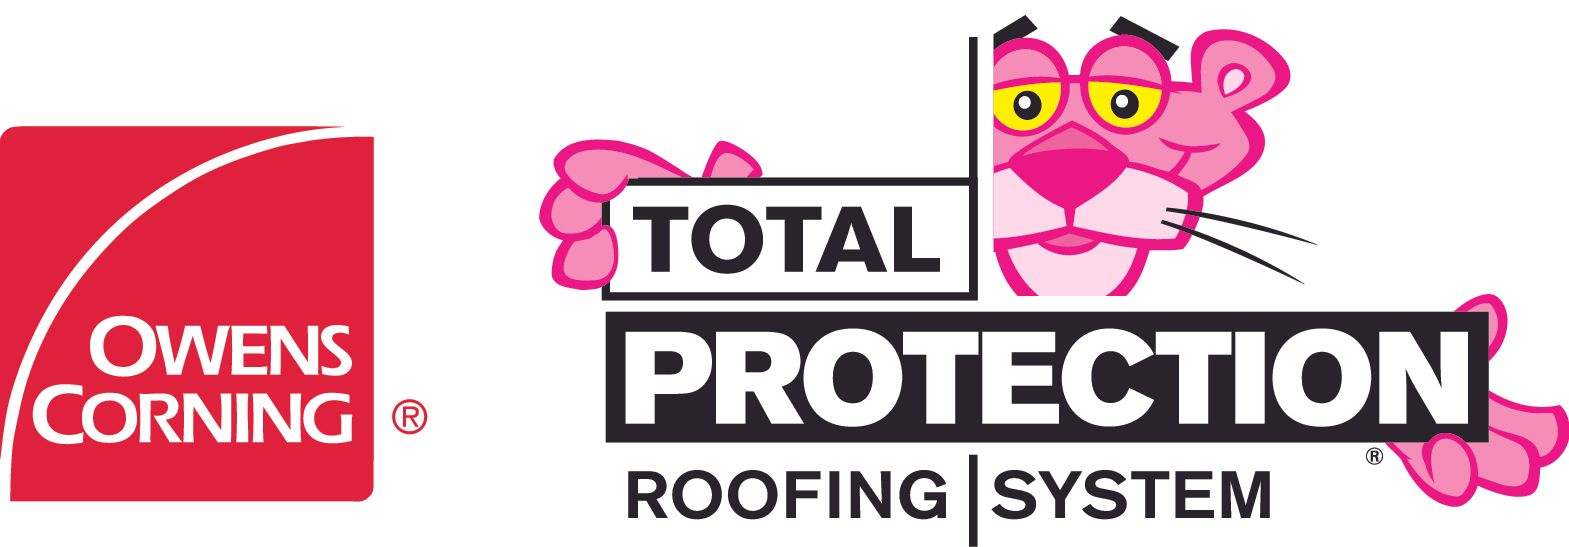 Owens Corning And Total Protection